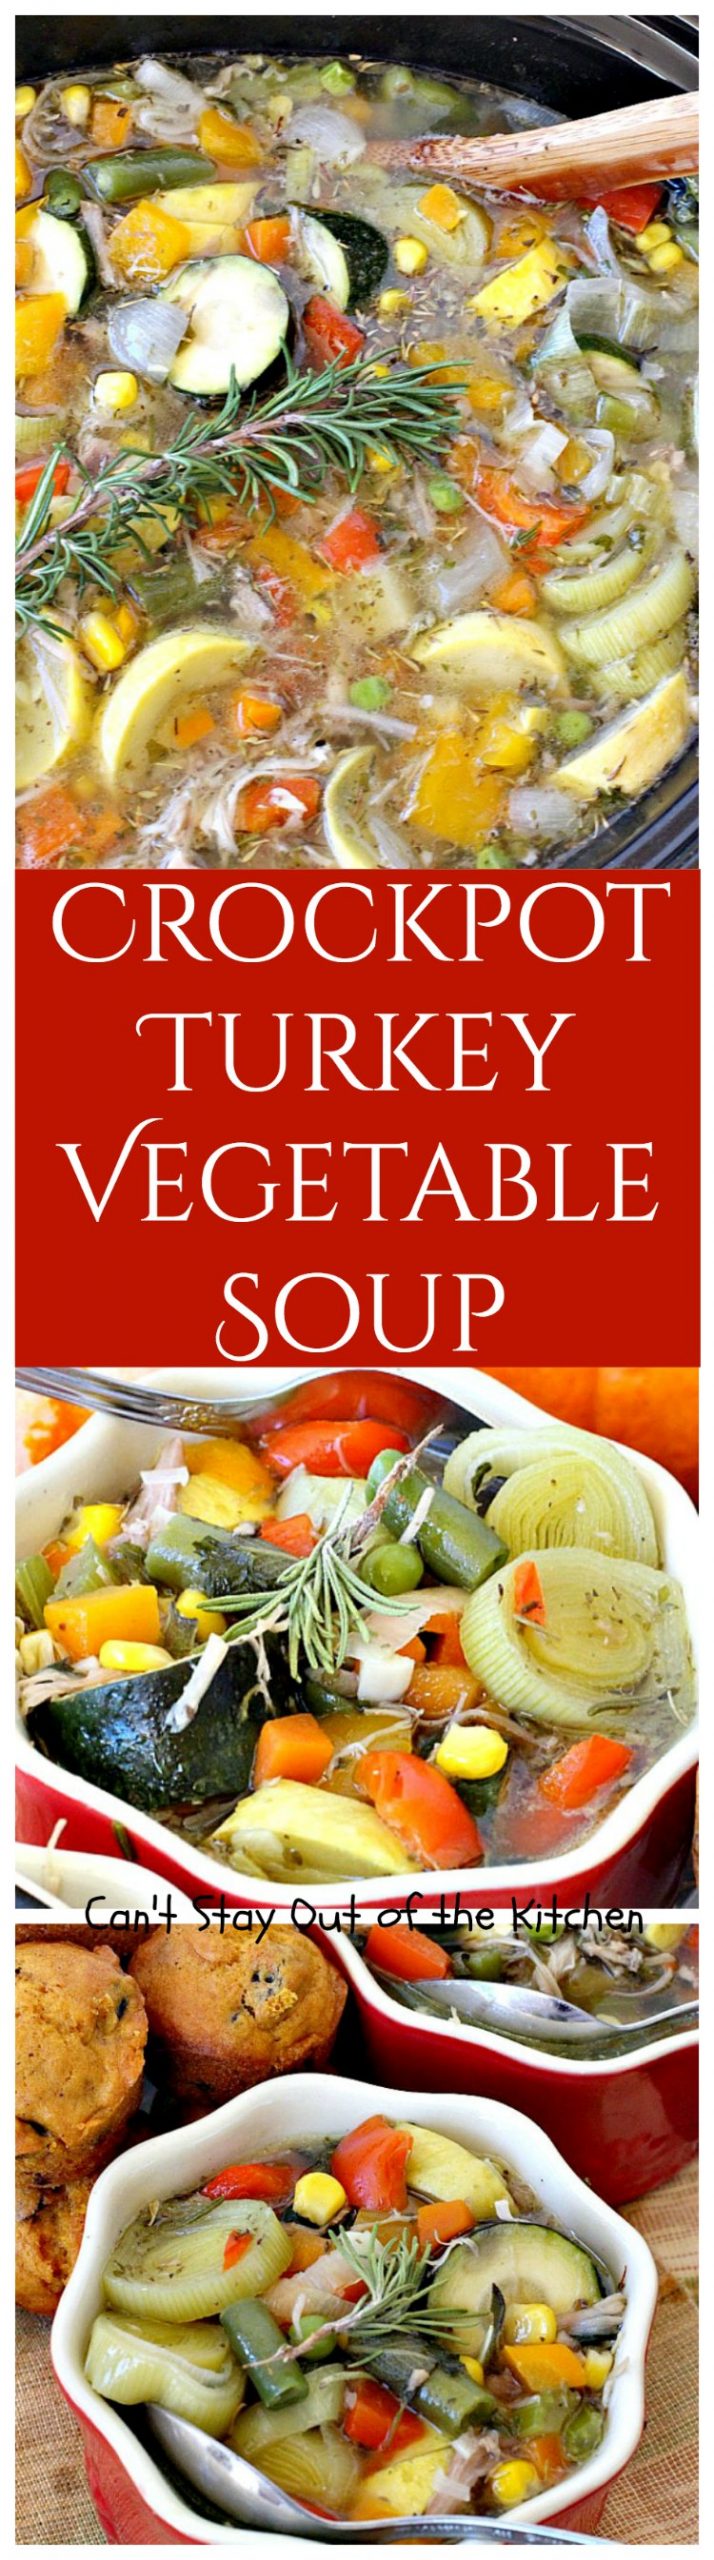 Crockpot Turkey Vegetable Soup | Can't Stay Out of the Kitchen